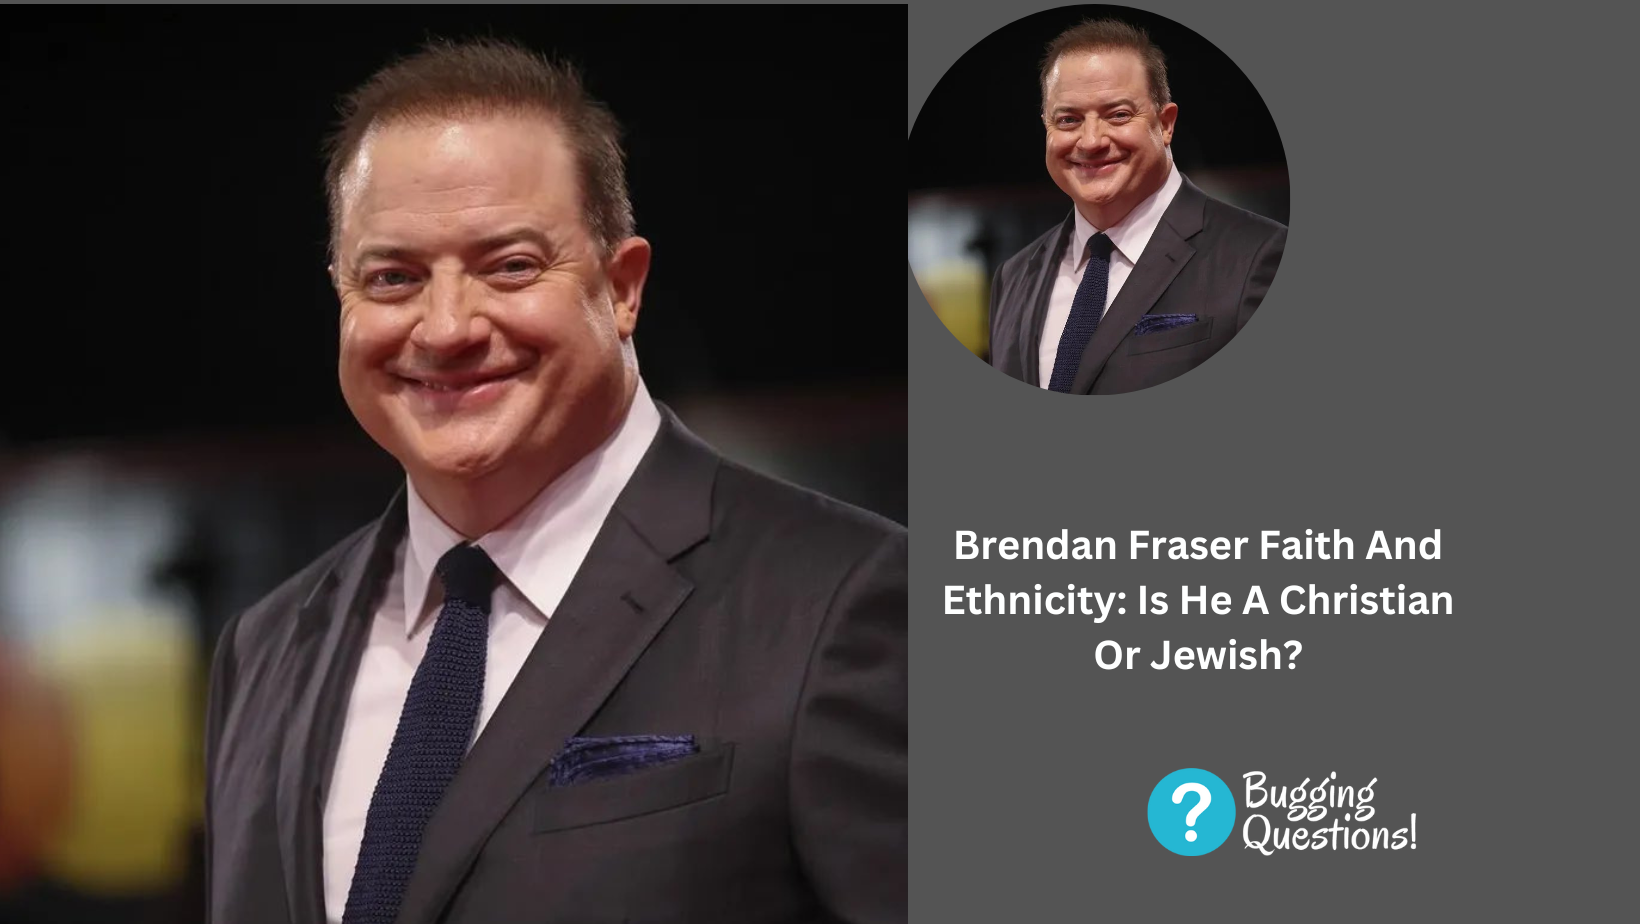 Brendan Fraser Faith And Ethnicity: Is He A Christian Or Jewish?